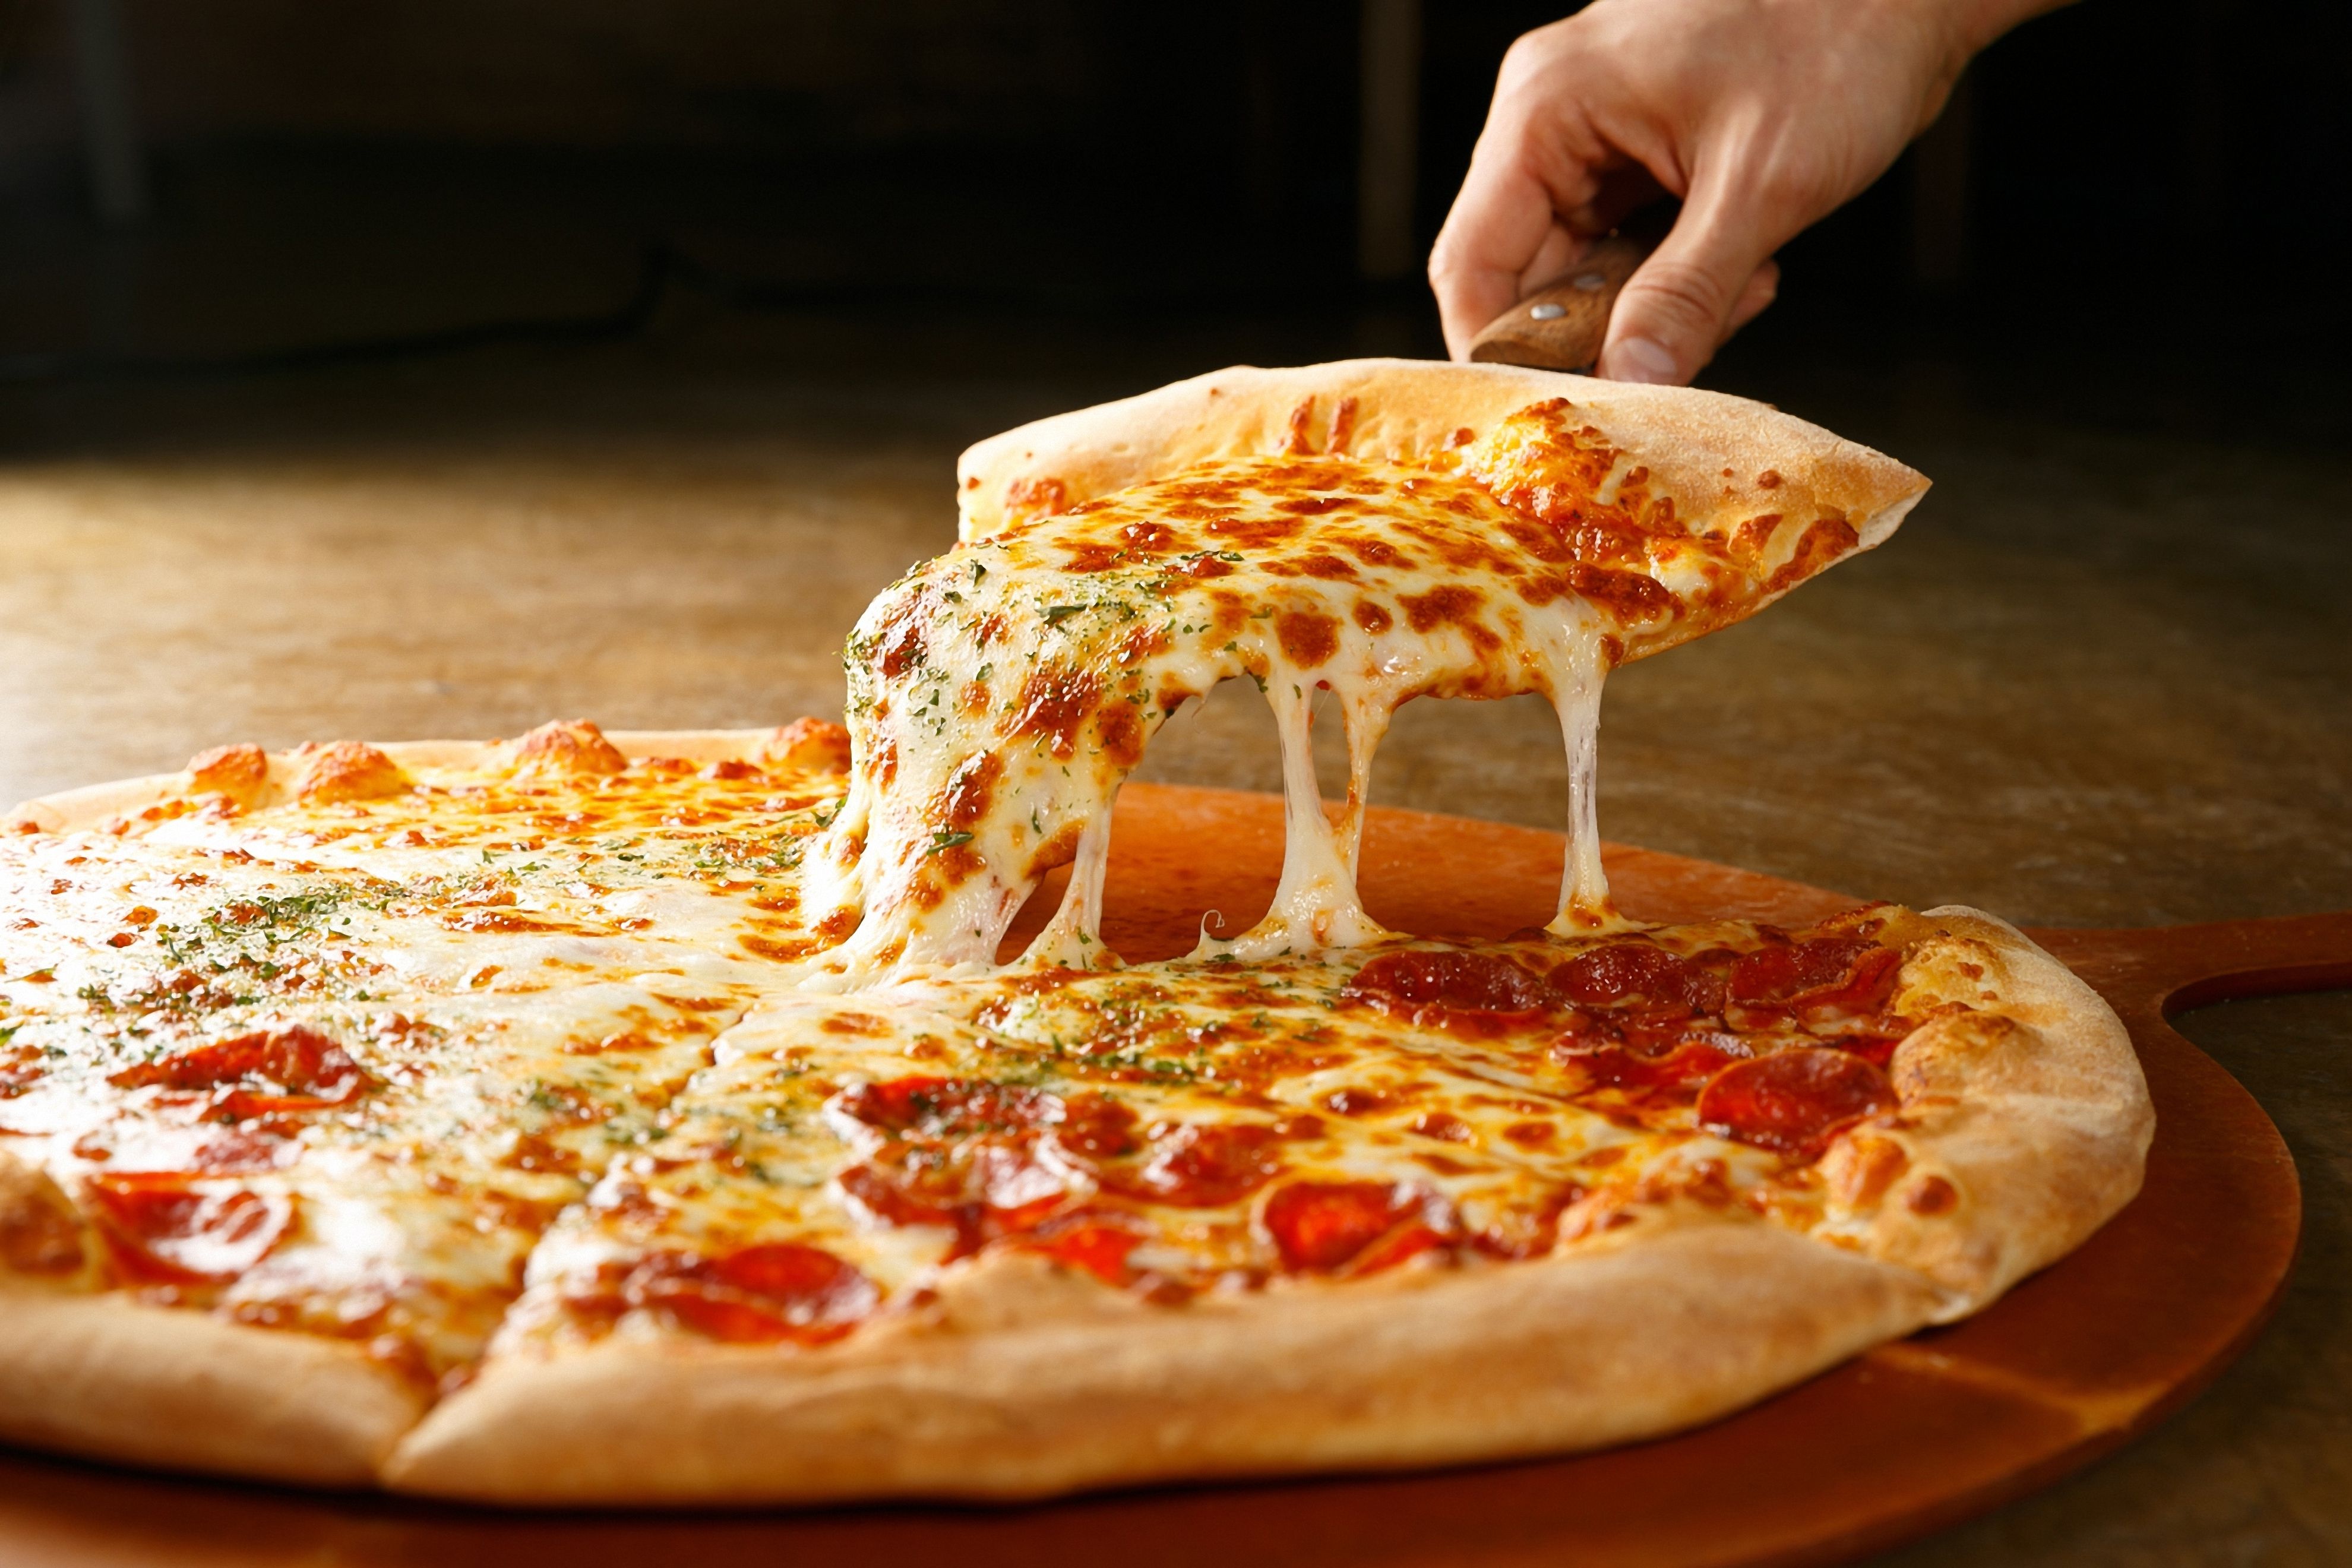 DeliciousRound: Pizza taste and convenience delivered directly to you!